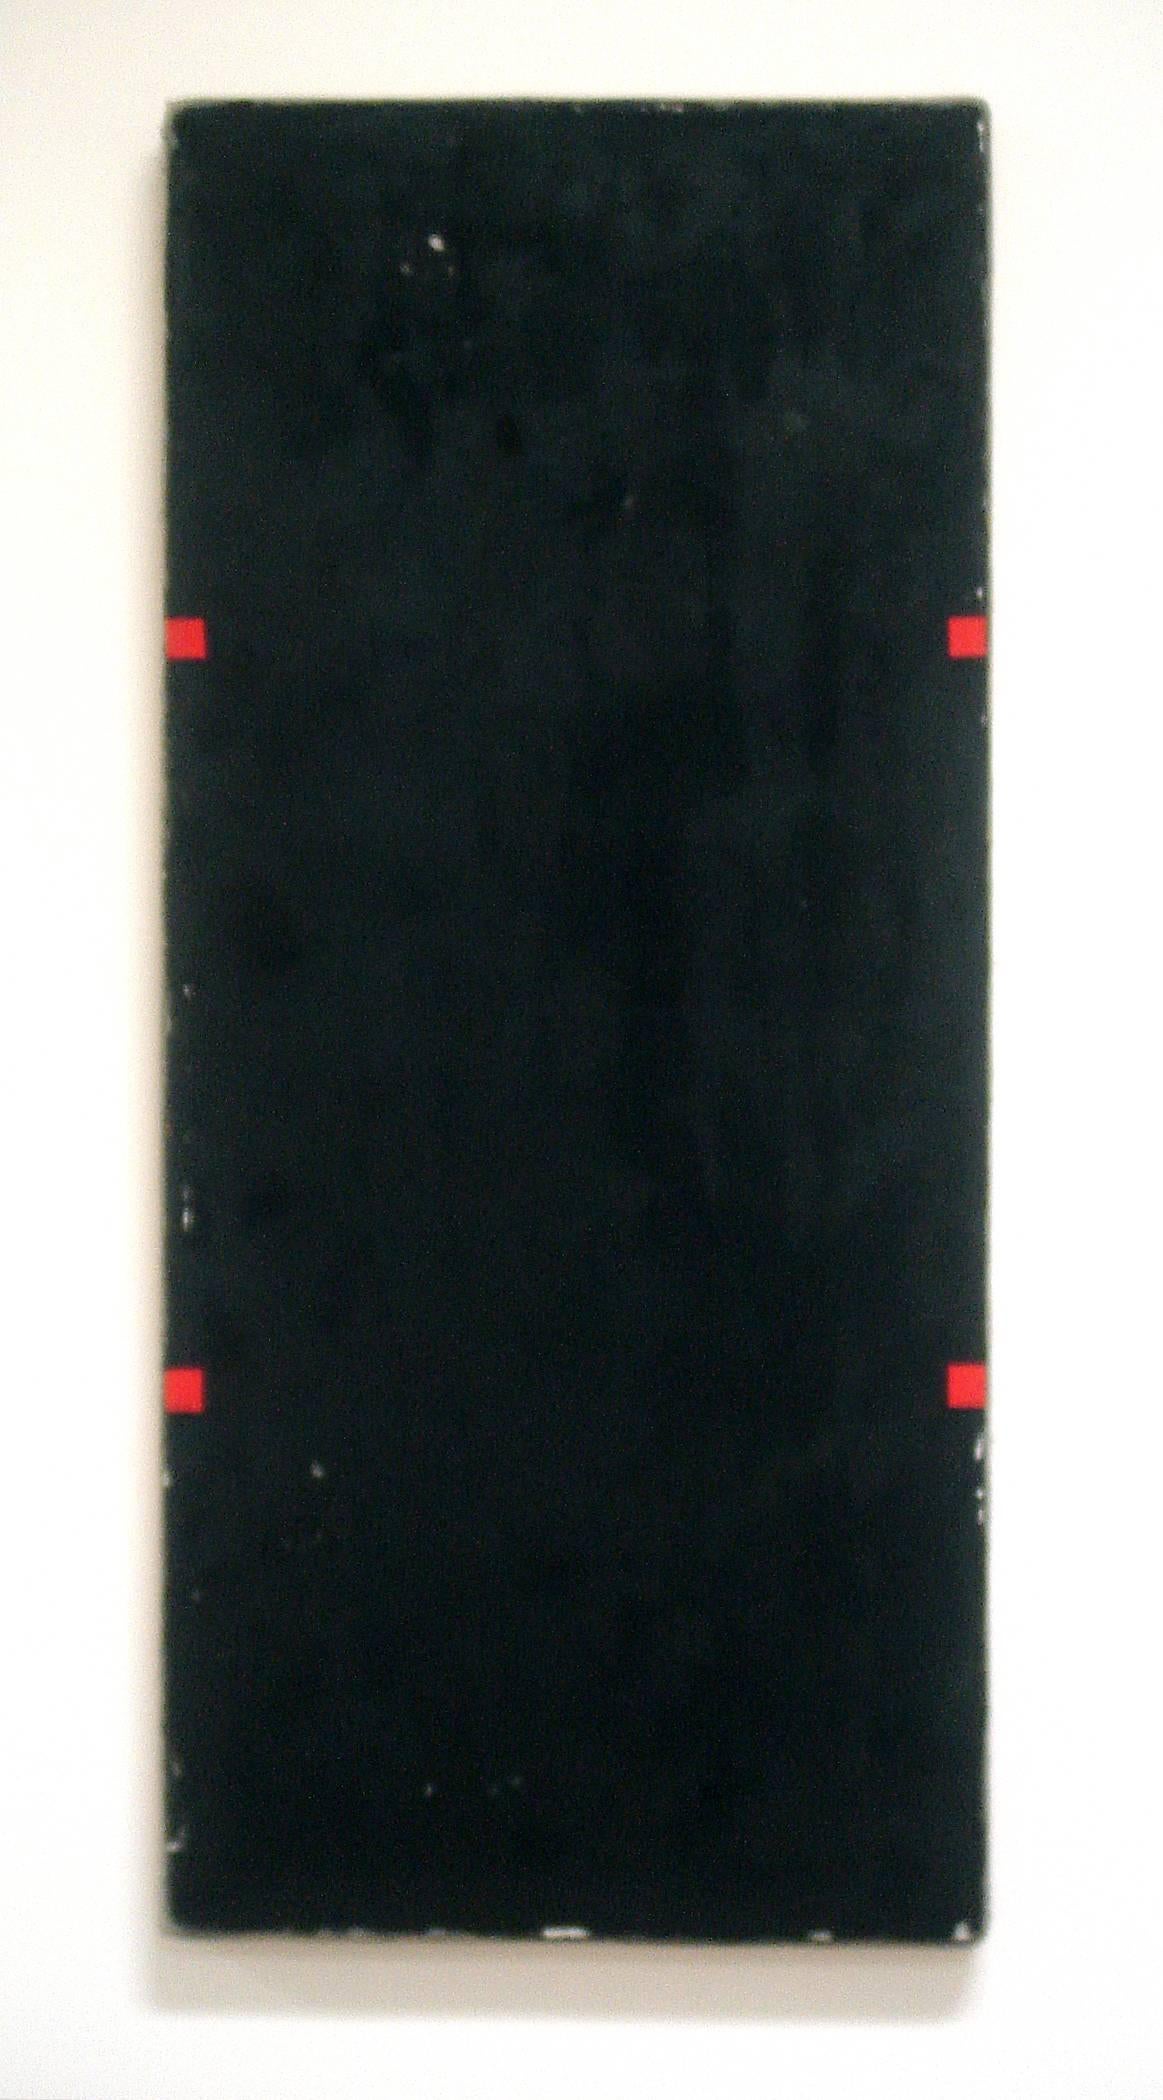 Otis Jones Abstract Painting - Black Rectangle with Four Red Rectangles